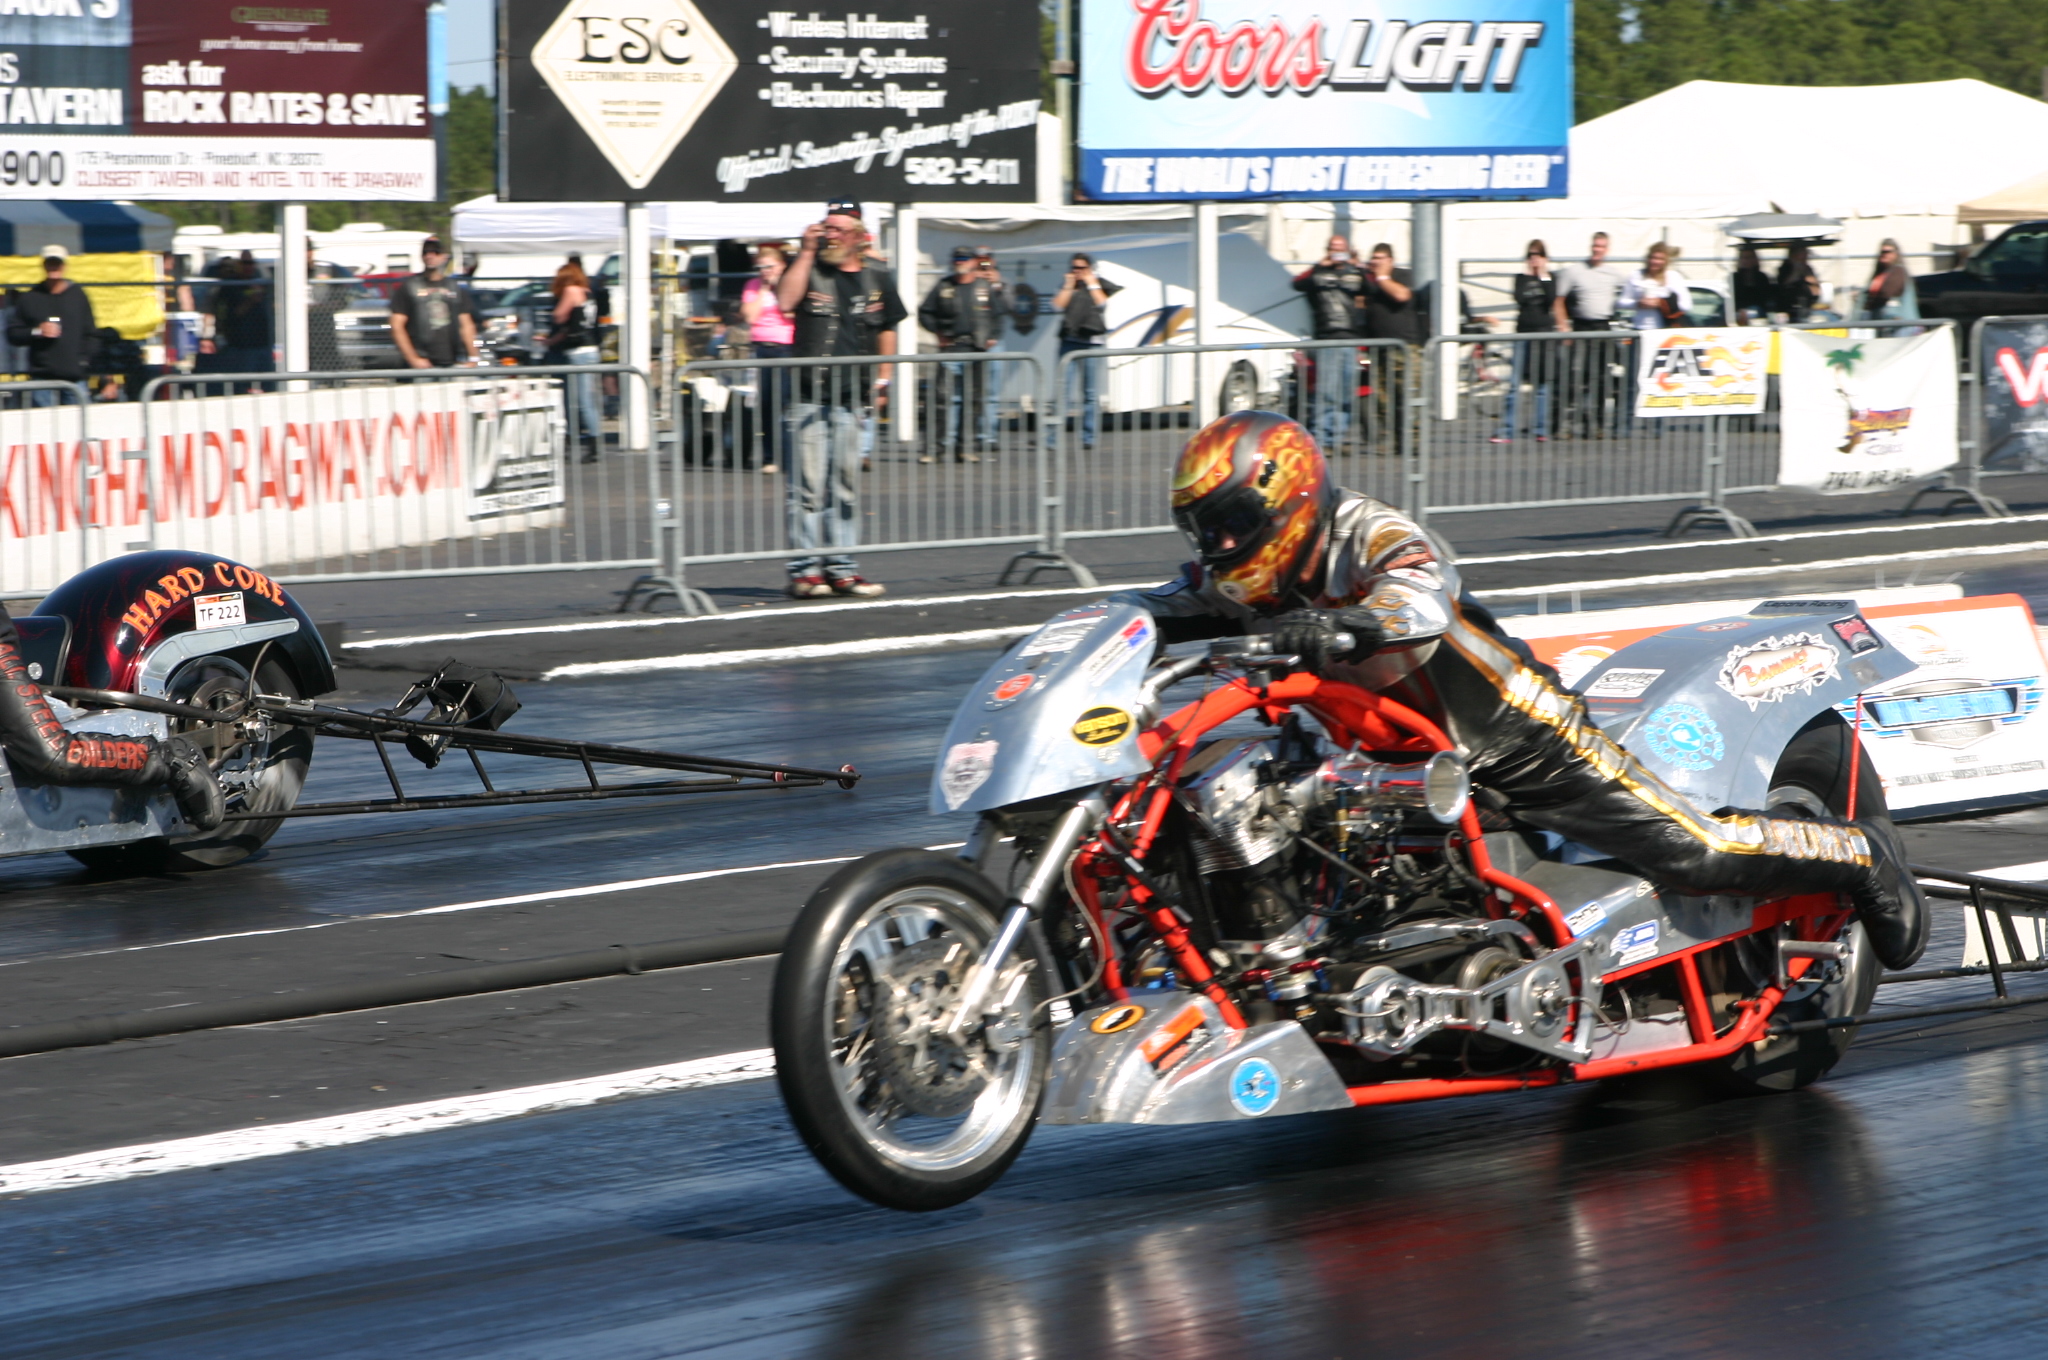 Bammer Top Fuel Harley Racing Ready for IHRA Night of Fire – Drag Bike News